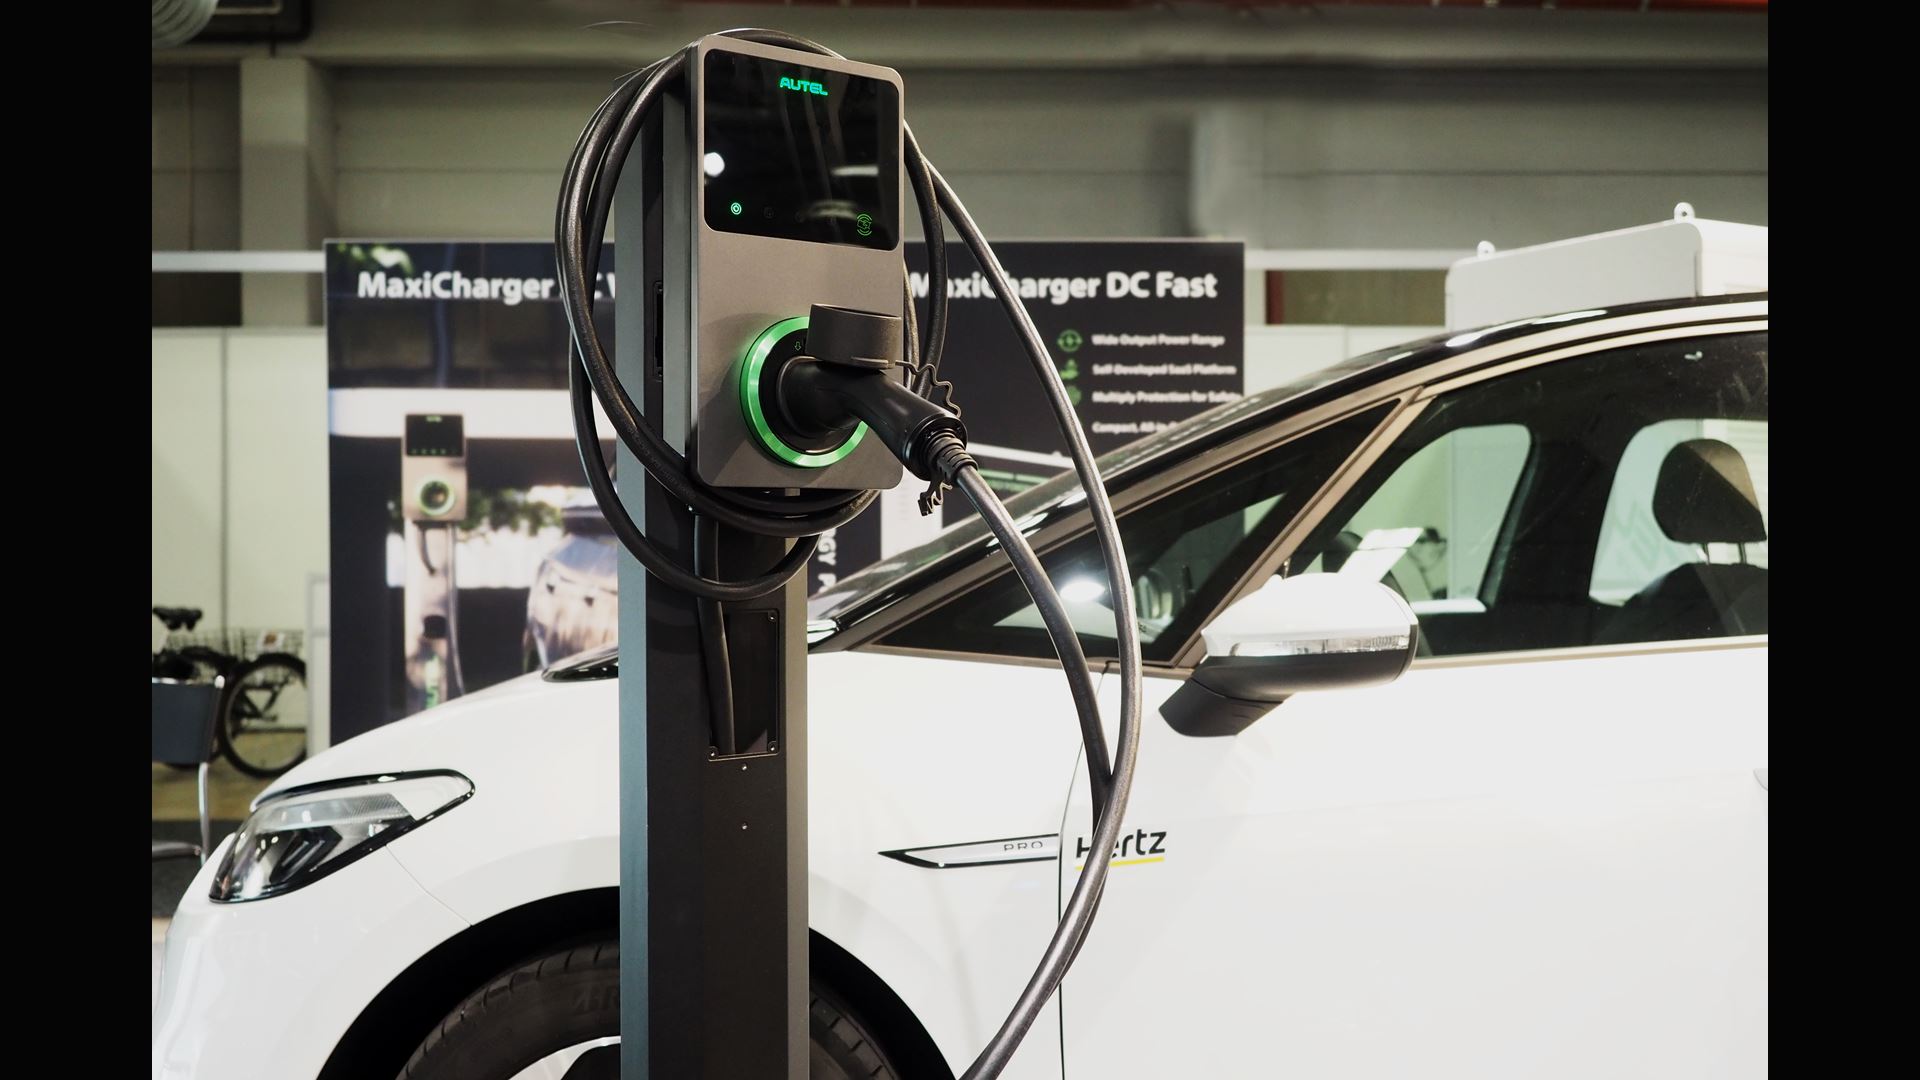 Autel Brings the Latest AC Wallbox and DC Fast Charger to EVS35 in